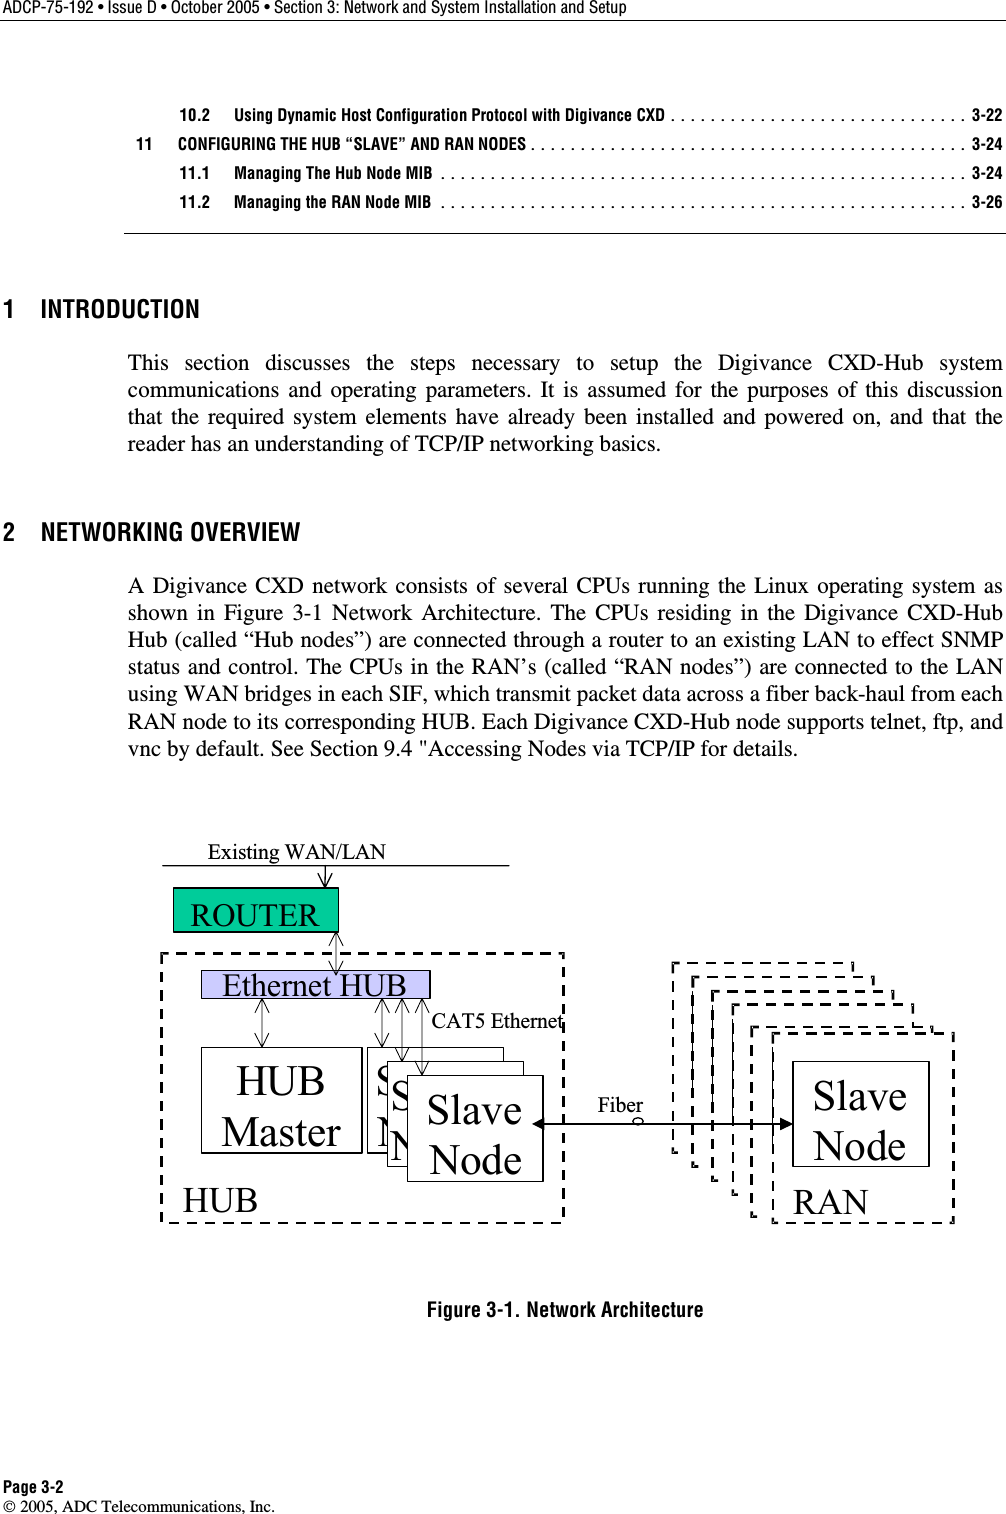 ADCP-75-192 • Issue D • October 2005 • Section 3: Network and System Installation and Setup Page 3-2  2005, ADC Telecommunications, Inc.   10.2  Using Dynamic Host Configuration Protocol with Digivance CXD .............................. 3-22   11  CONFIGURING THE HUB “SLAVE” AND RAN NODES............................................ 3-24   11.1  Managing The Hub Node MIB ..................................................... 3-24   11.2  Managing the RAN Node MIB ..................................................... 3-26 1 INTRODUCTION This section discusses the steps necessary to setup the Digivance CXD-Hub system communications and operating parameters. It is assumed for the purposes of this discussion that the required system elements have already been installed and powered on, and that the reader has an understanding of TCP/IP networking basics. 2 NETWORKING OVERVIEW A Digivance CXD network consists of several CPUs running the Linux operating system as shown in Figure 3-1 Network Architecture. The CPUs residing in the Digivance CXD-Hub Hub (called “Hub nodes”) are connected through a router to an existing LAN to effect SNMP status and control. The CPUs in the RAN’s (called “RAN nodes”) are connected to the LAN using WAN bridges in each SIF, which transmit packet data across a fiber back-haul from each RAN node to its corresponding HUB. Each Digivance CXD-Hub node supports telnet, ftp, and vnc by default. See Section 9.4 &quot;Accessing Nodes via TCP/IP for details.   Ethernet HUBHUBMasterSlaveNodeHUBSlaveNodeSlaveNode RASlaveNodeRANSlaveNodeRANSlaveNodeRANSlaveNodeRANFiberCAT5 EthernetROUTERSlaveNodeRANSlaveNodeExisting WAN/LAN Figure 3-1. Network Architecture 